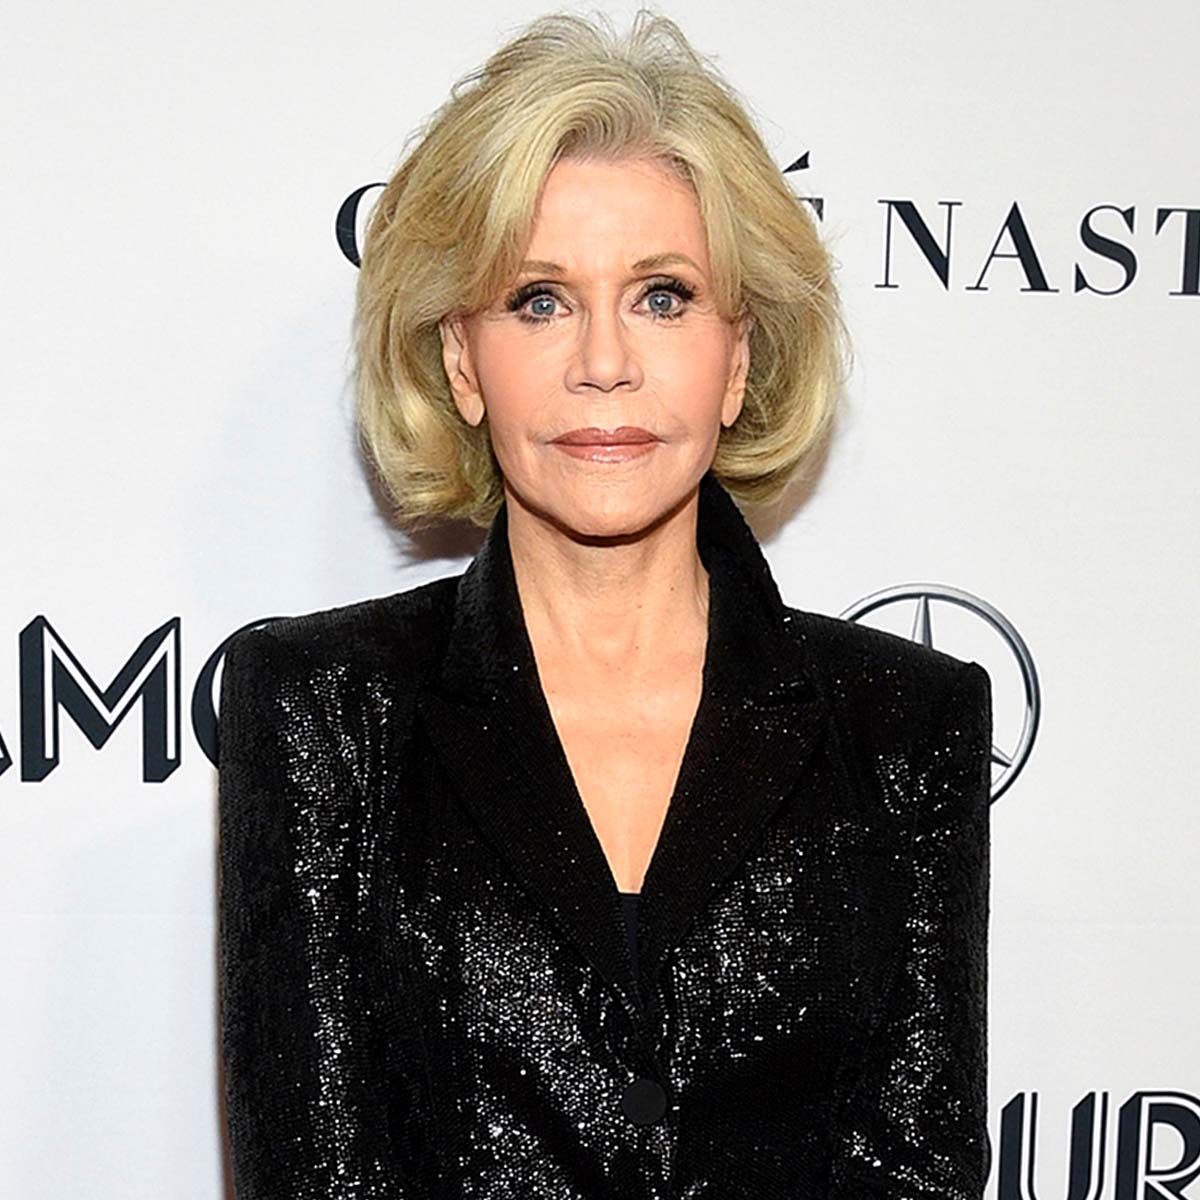 Jane Fonda Diagnosed With 'Very Treatable' Cancer, Begins Chemo